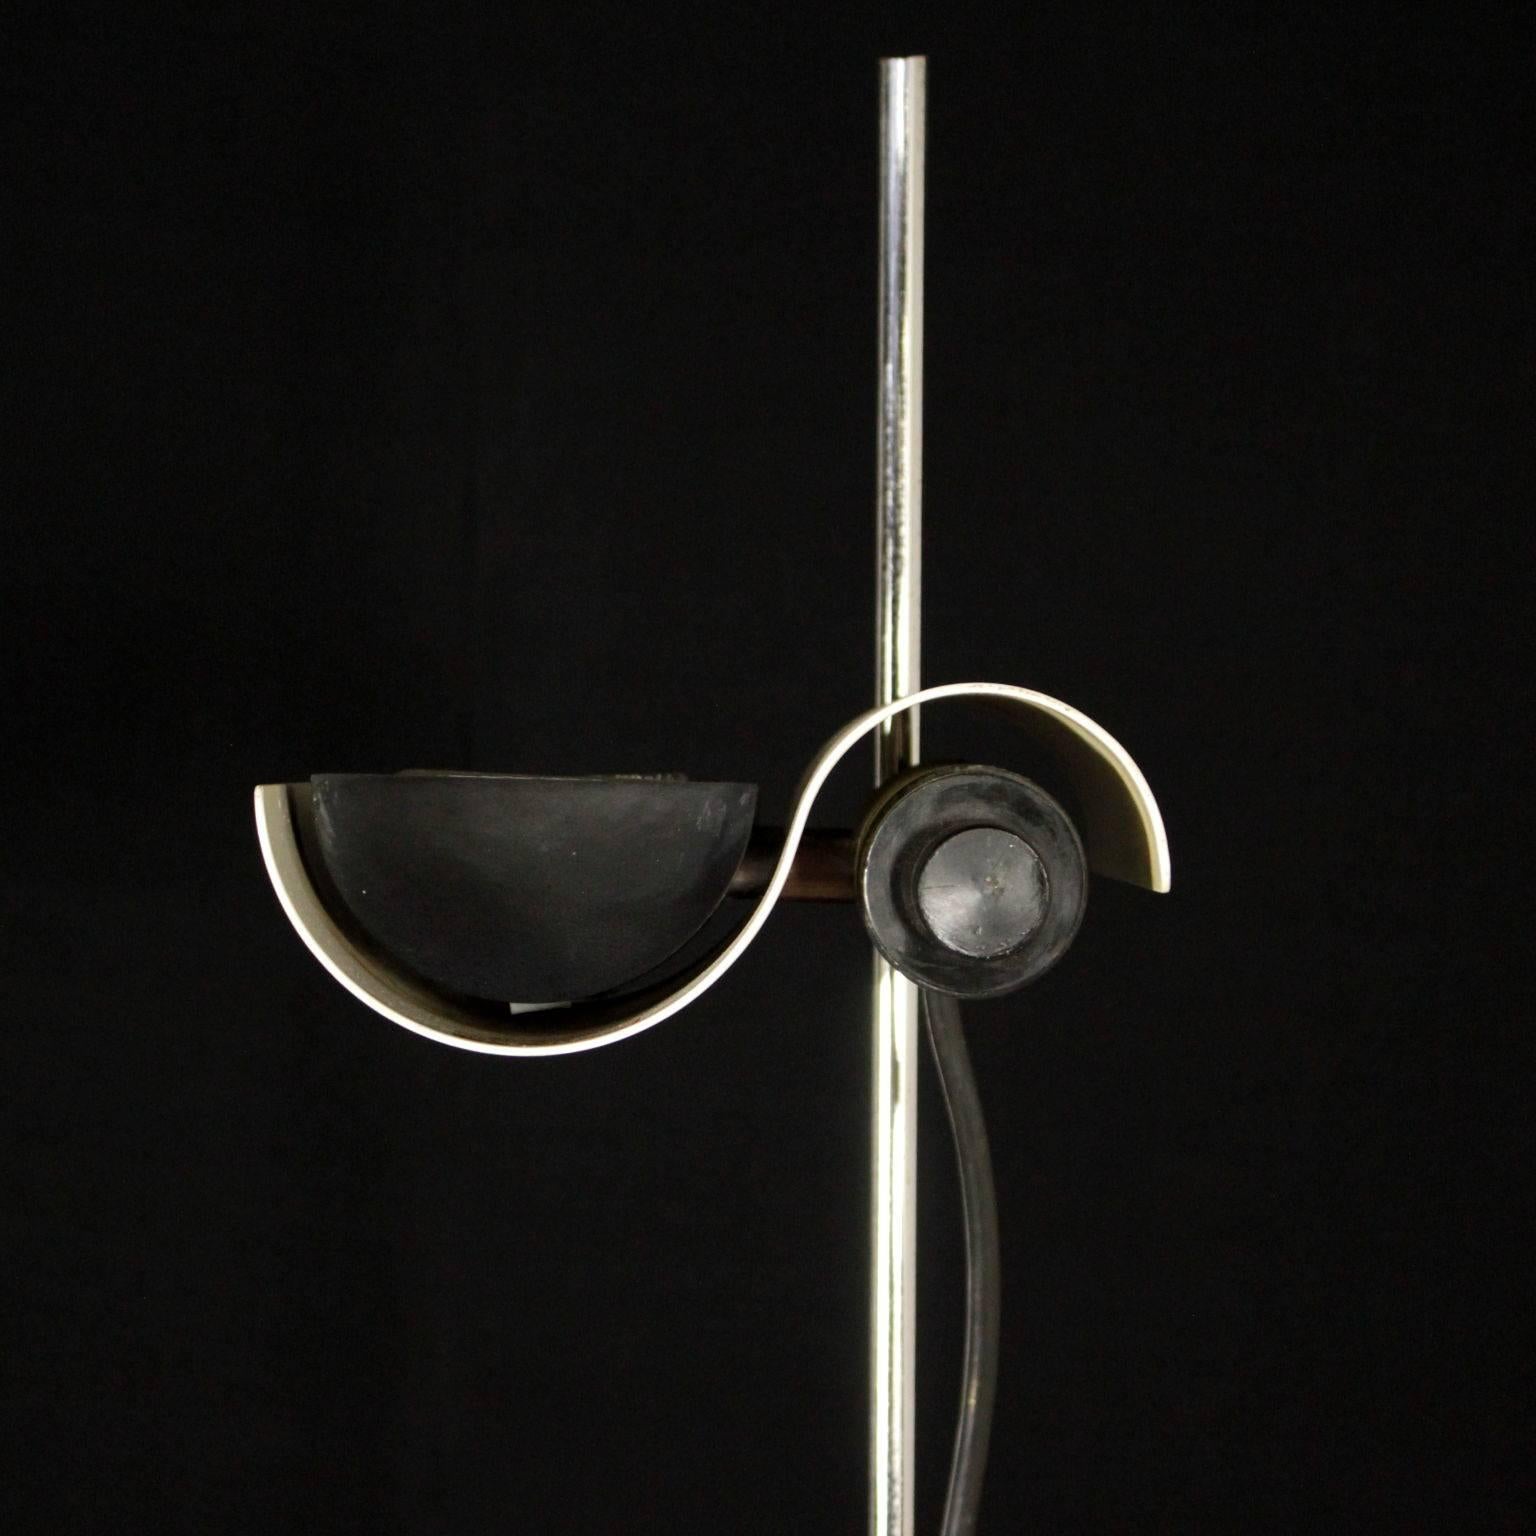 Mid-Century Modern Floor Lamp by Vico Magistretti for Oluce Chromed Metal Lacquered Aluminium 1980s